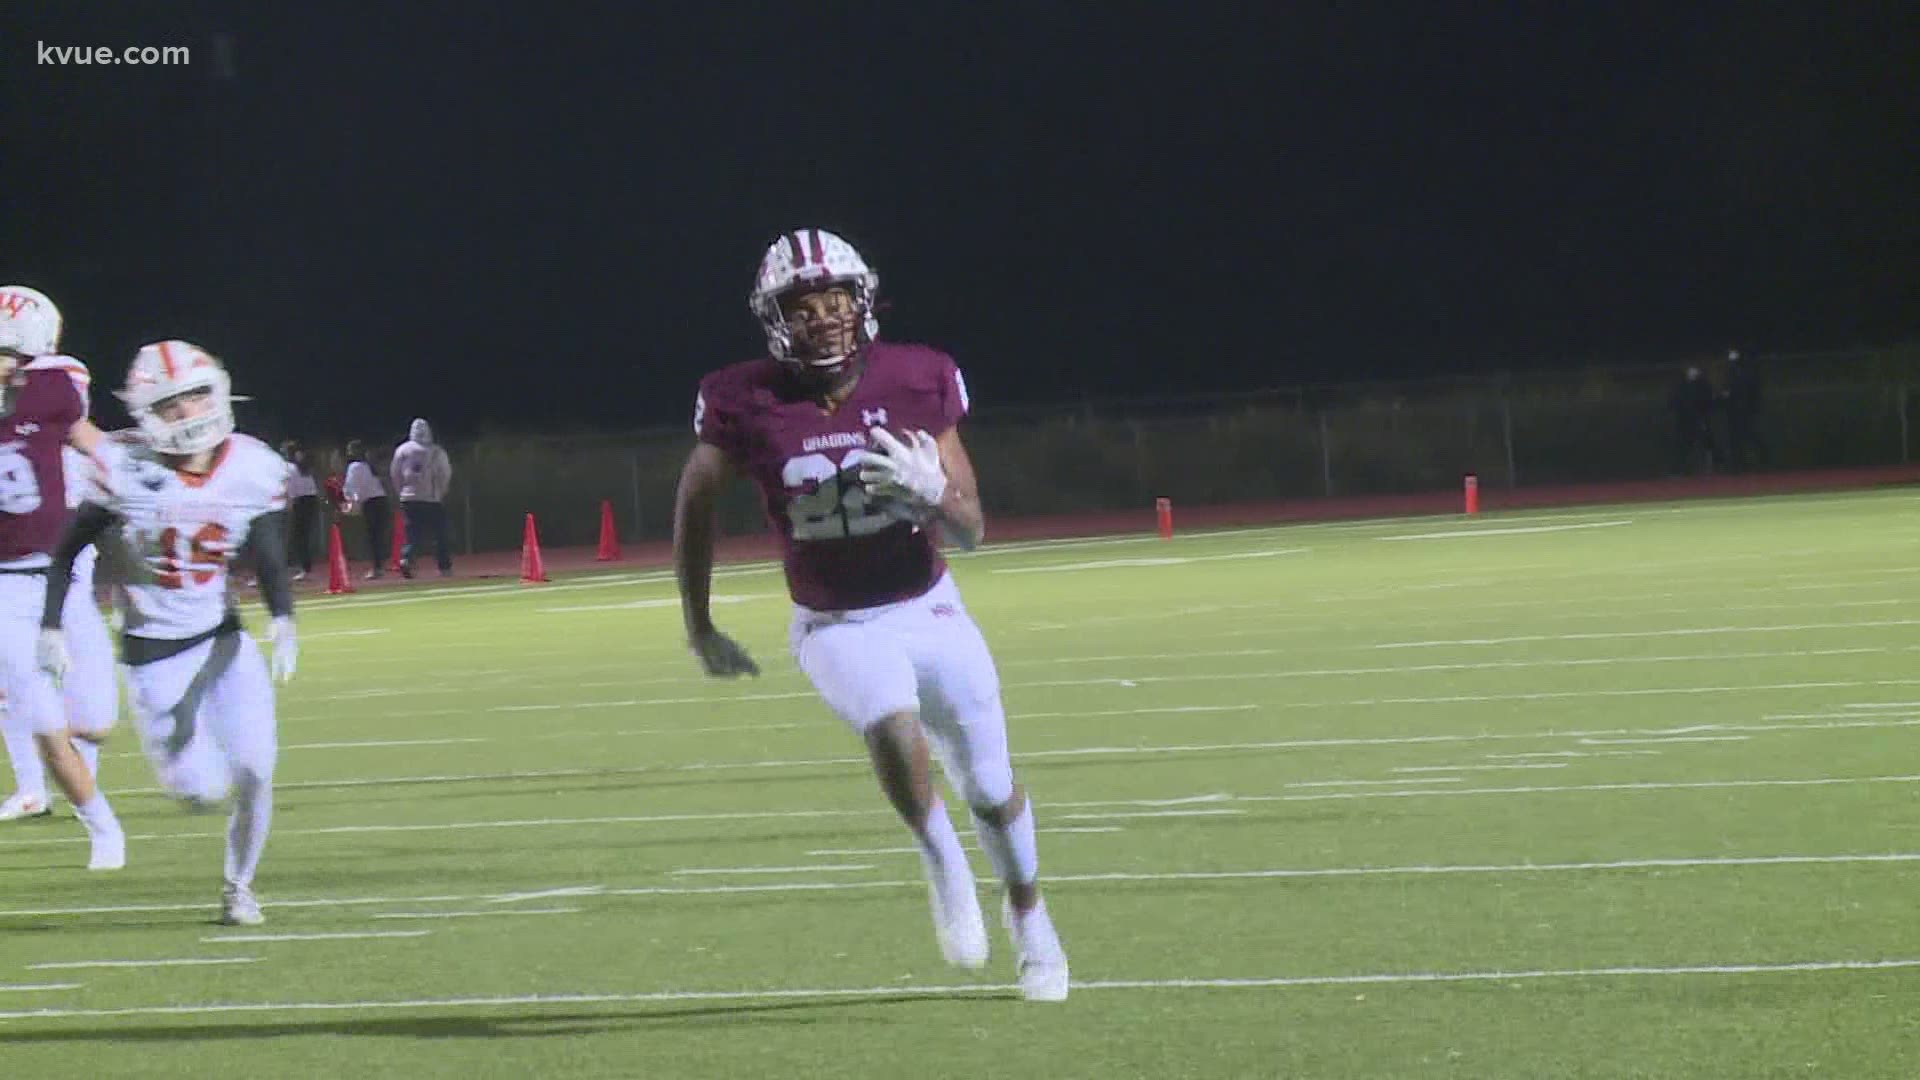 Vote on your top Texas high school football play – KVUE Big Save of the Week | KVUE